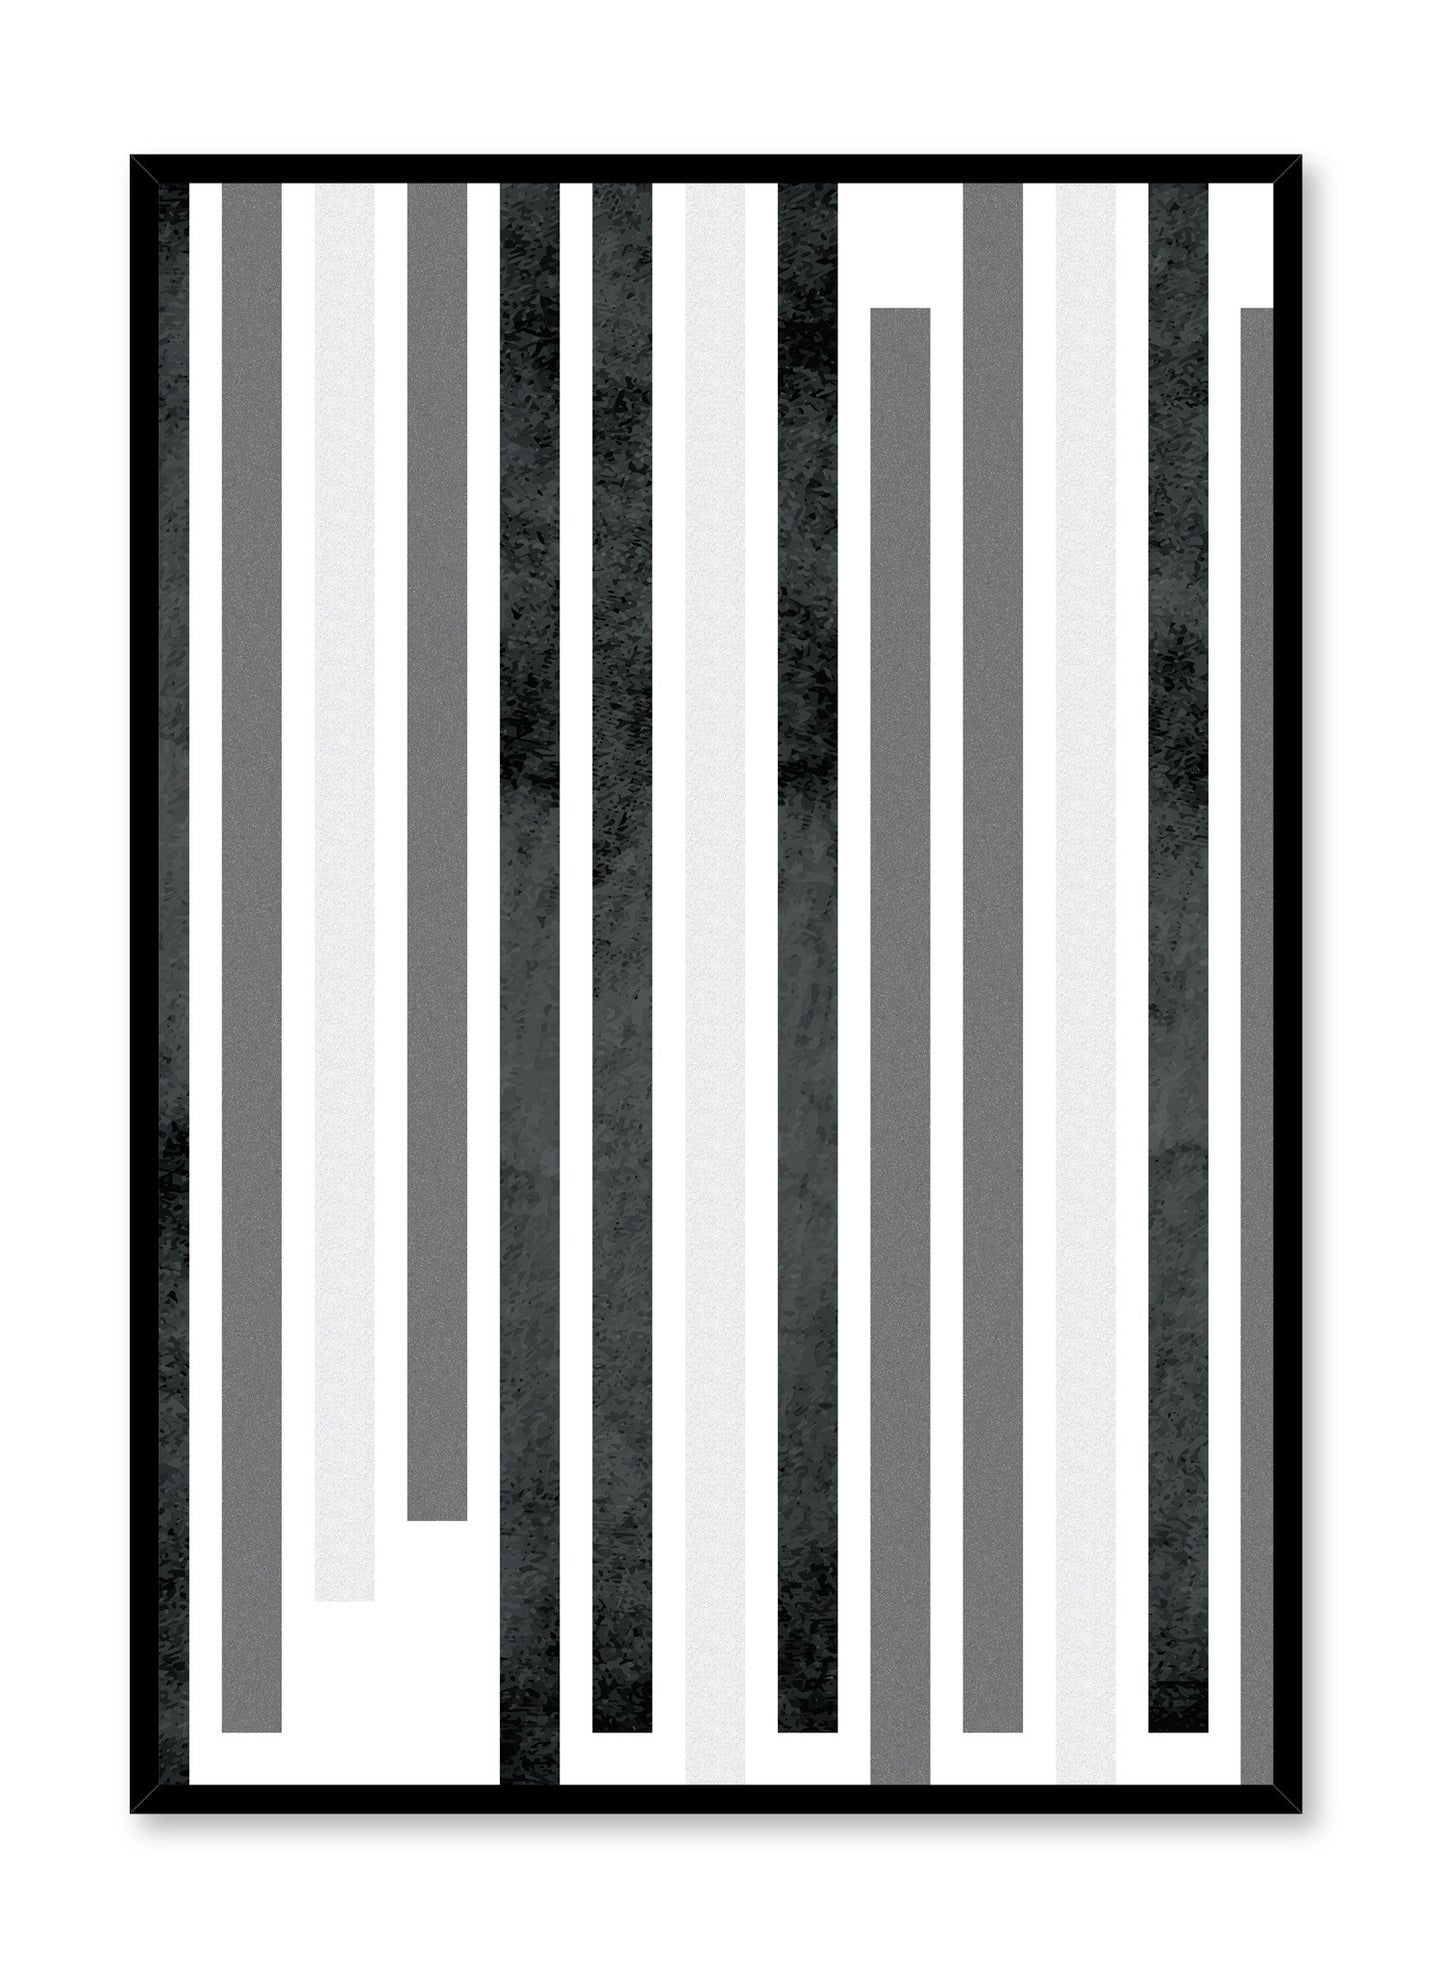 Scandinavian art print by Opposite Wall with Zoom Out black and white graphic textured lines design